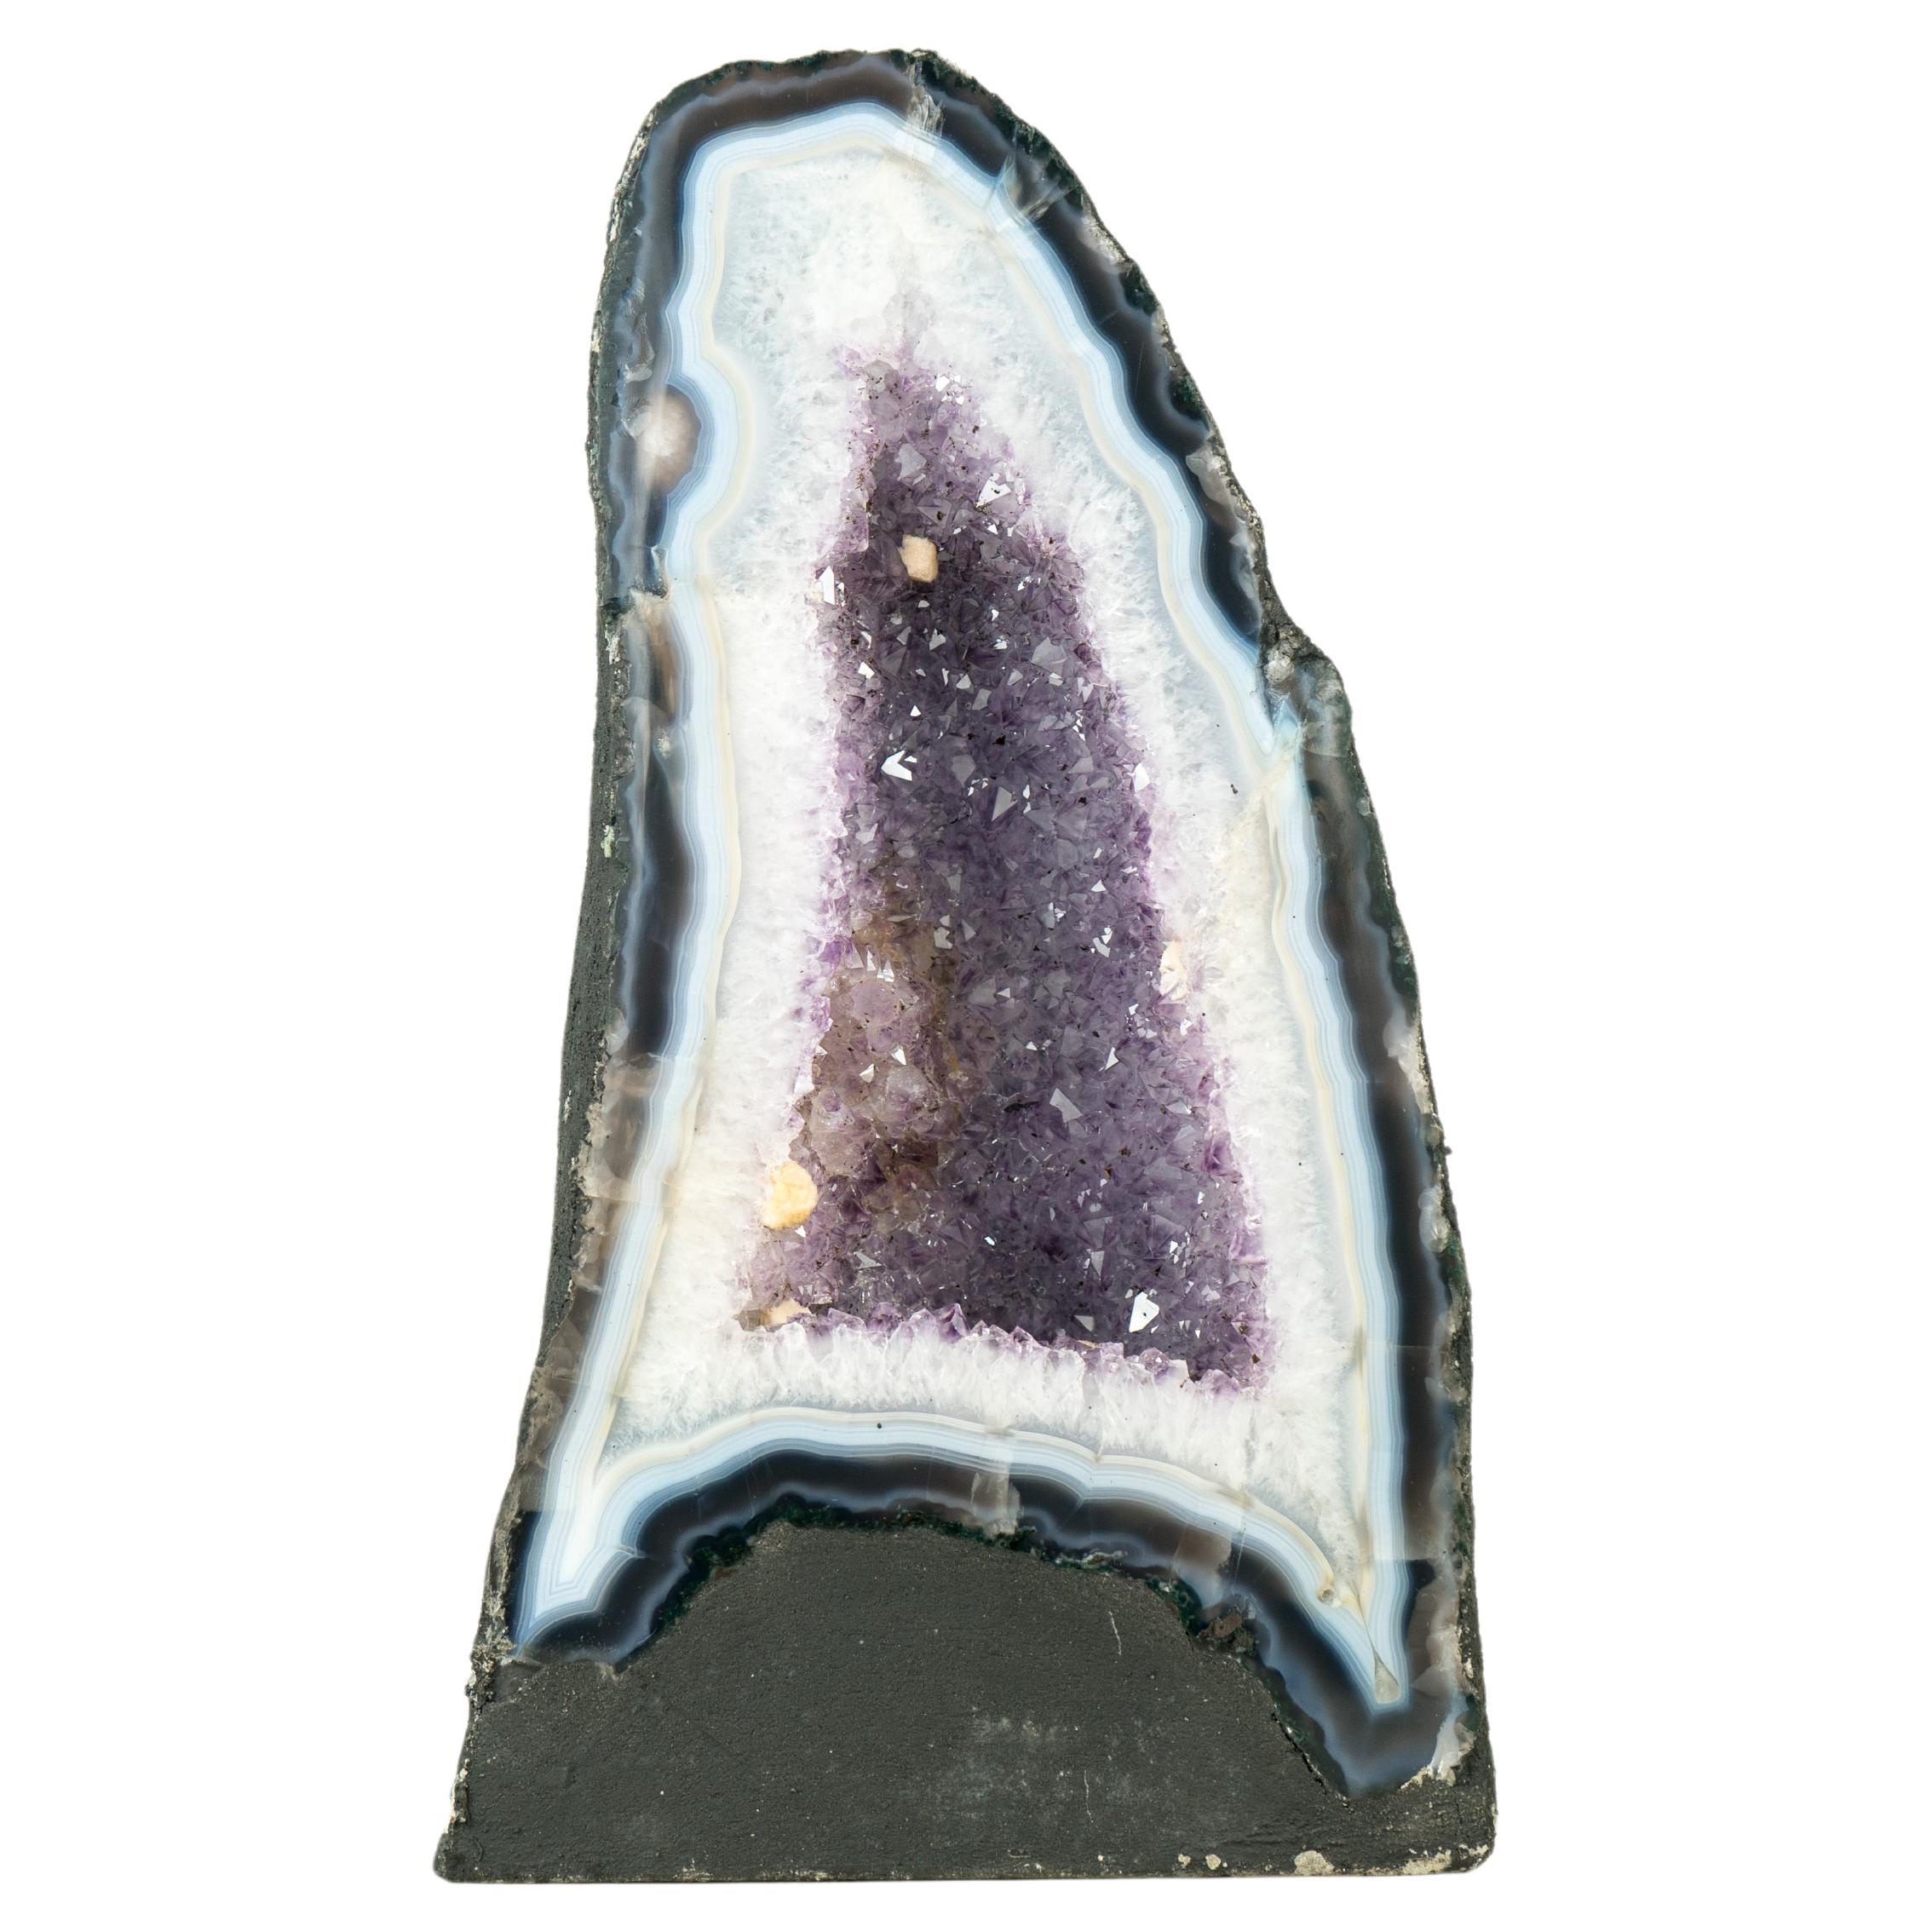 White and Blue Lace Agate Cathedral Geode with Lavender Amethyst Crystal